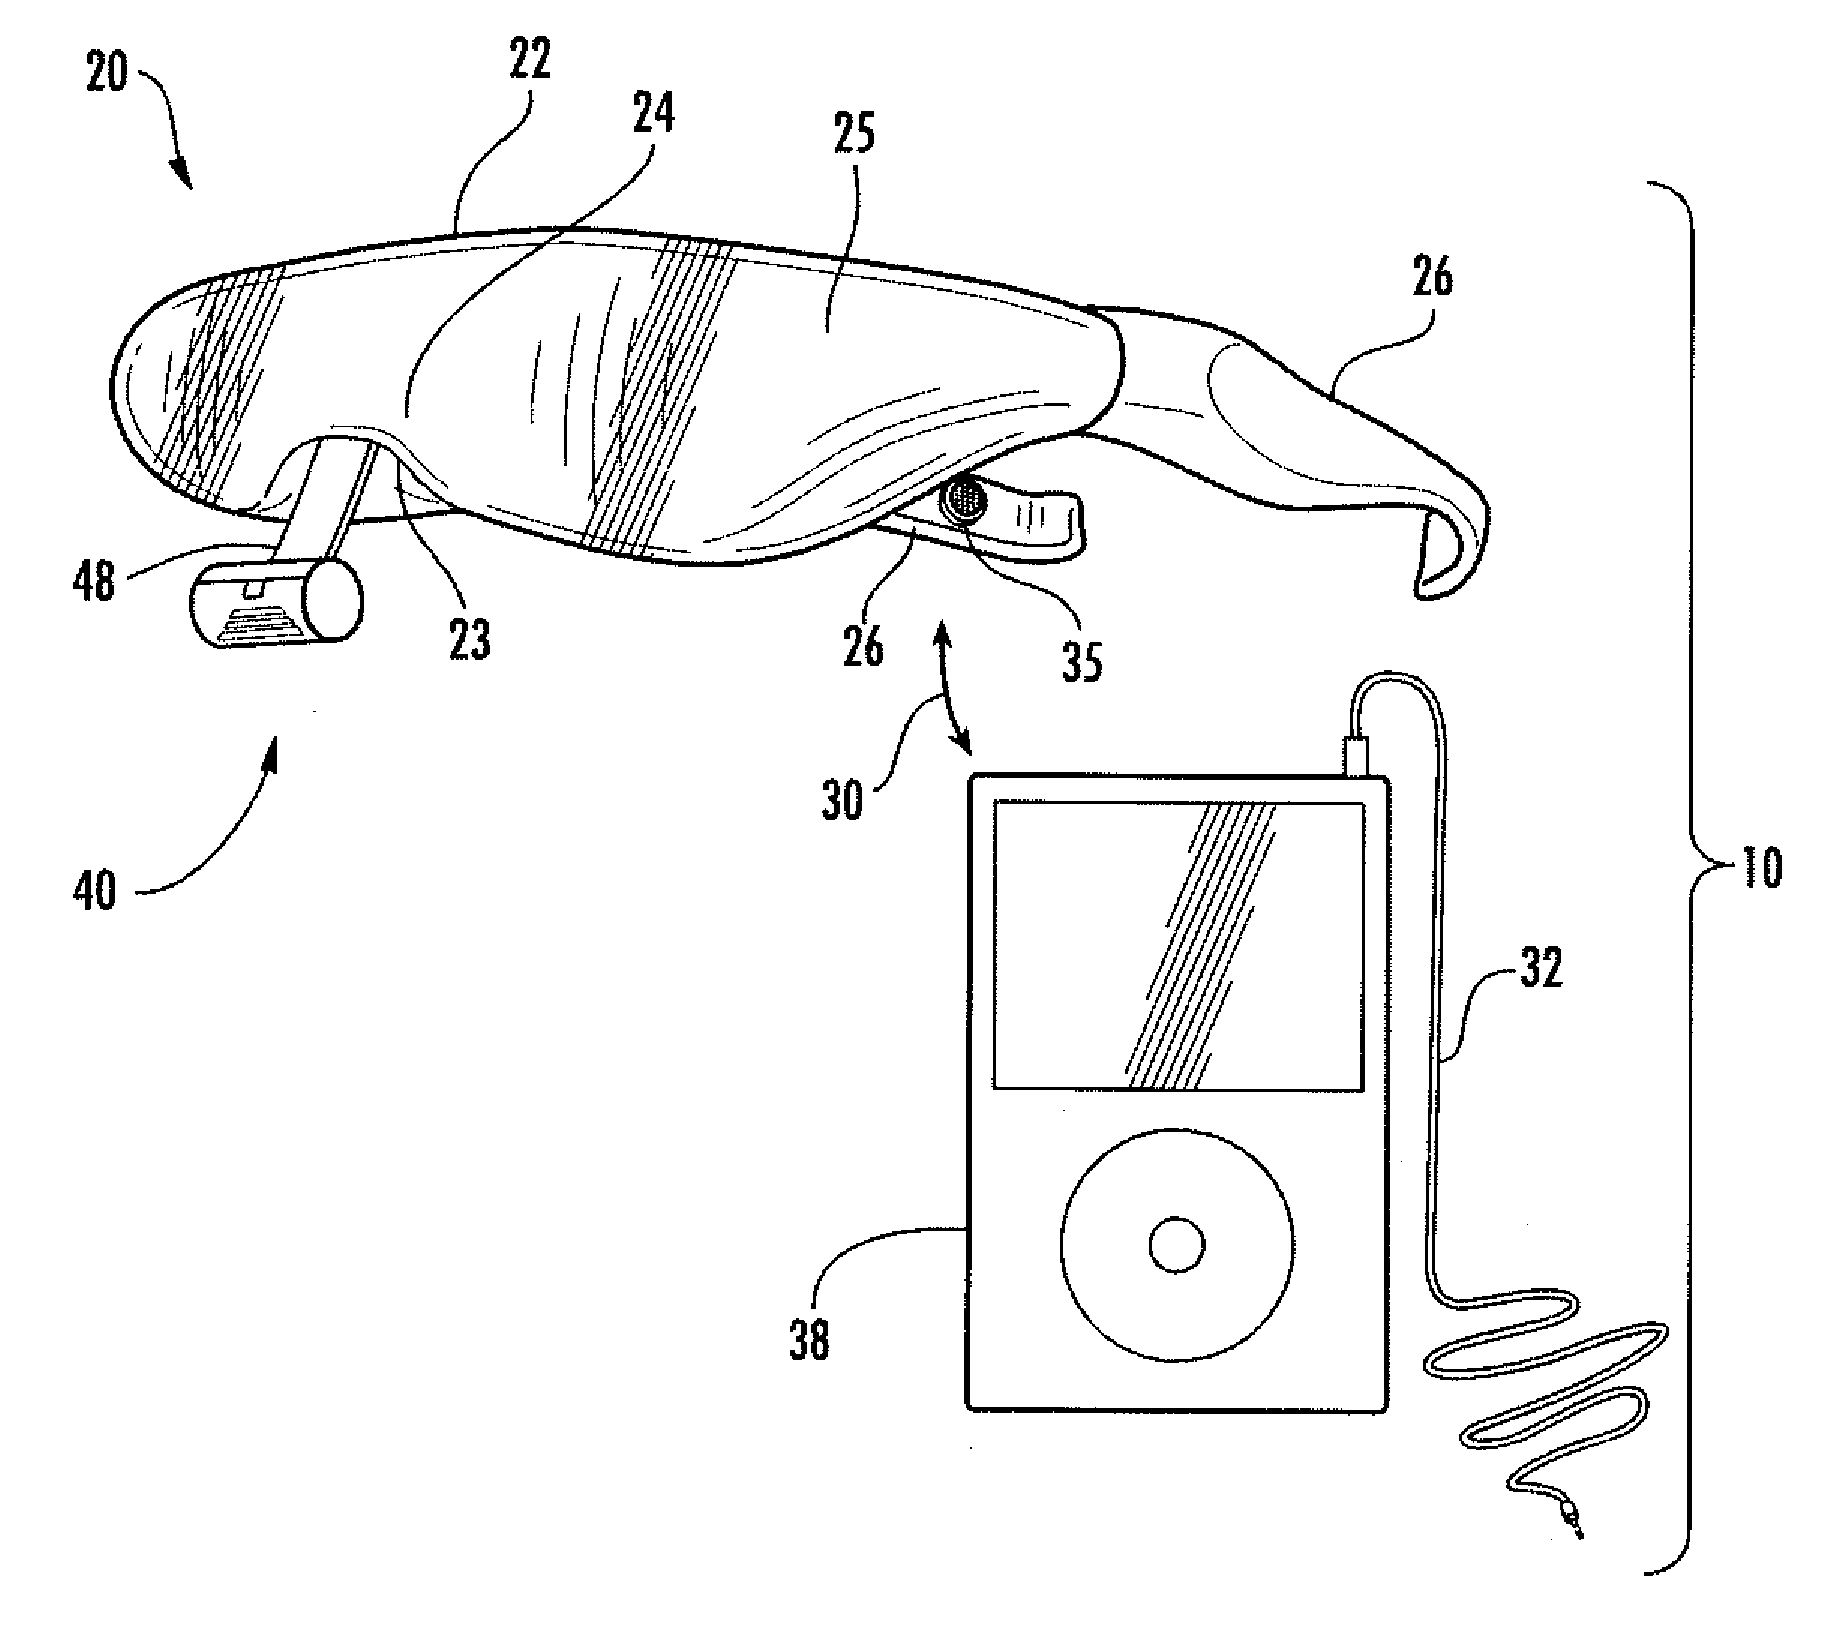 Apparatus and method of relaxation therapy